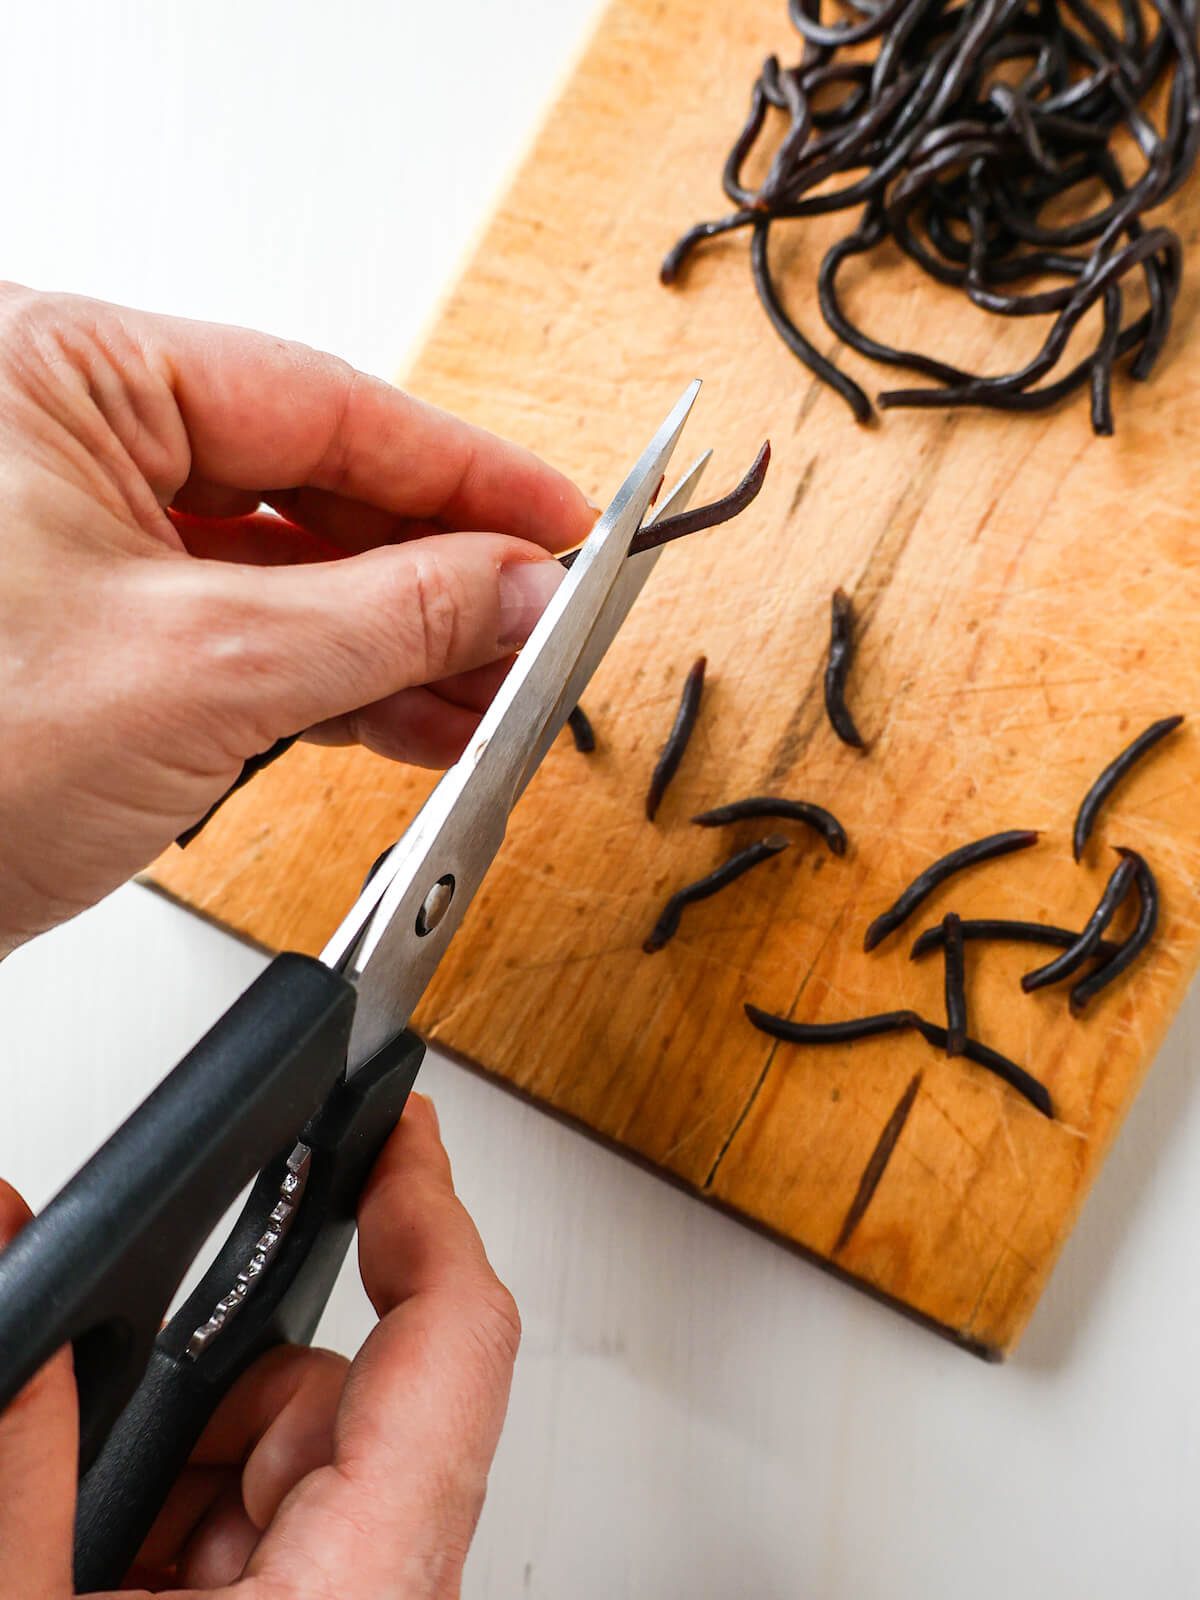 Cutting licorice laces with kitchen shears to create little candy eyelashes.